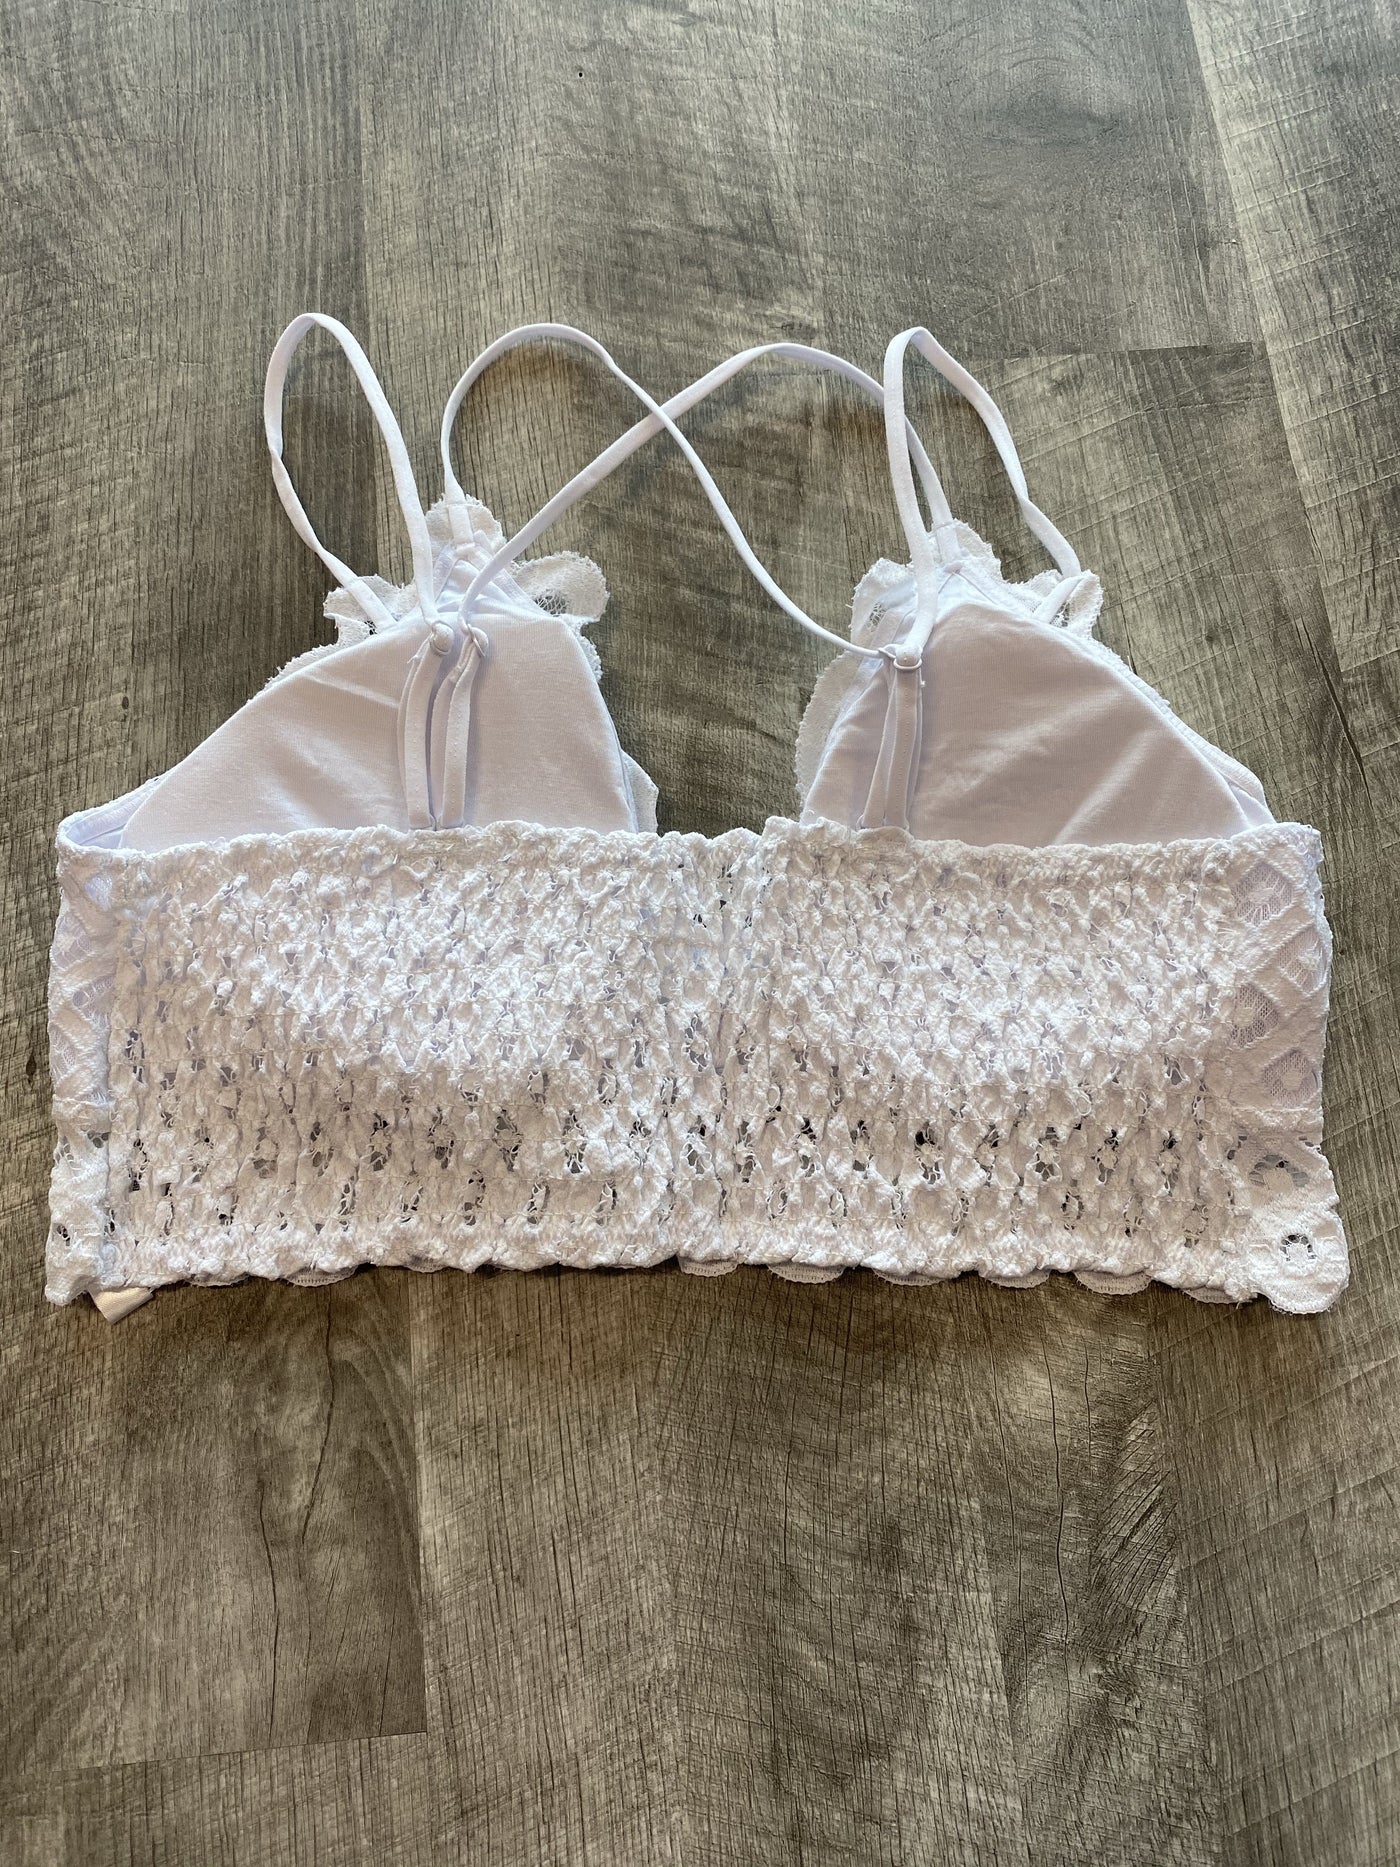 Crochet Lace Bralette In White - The Teal Turtle Clothing Company